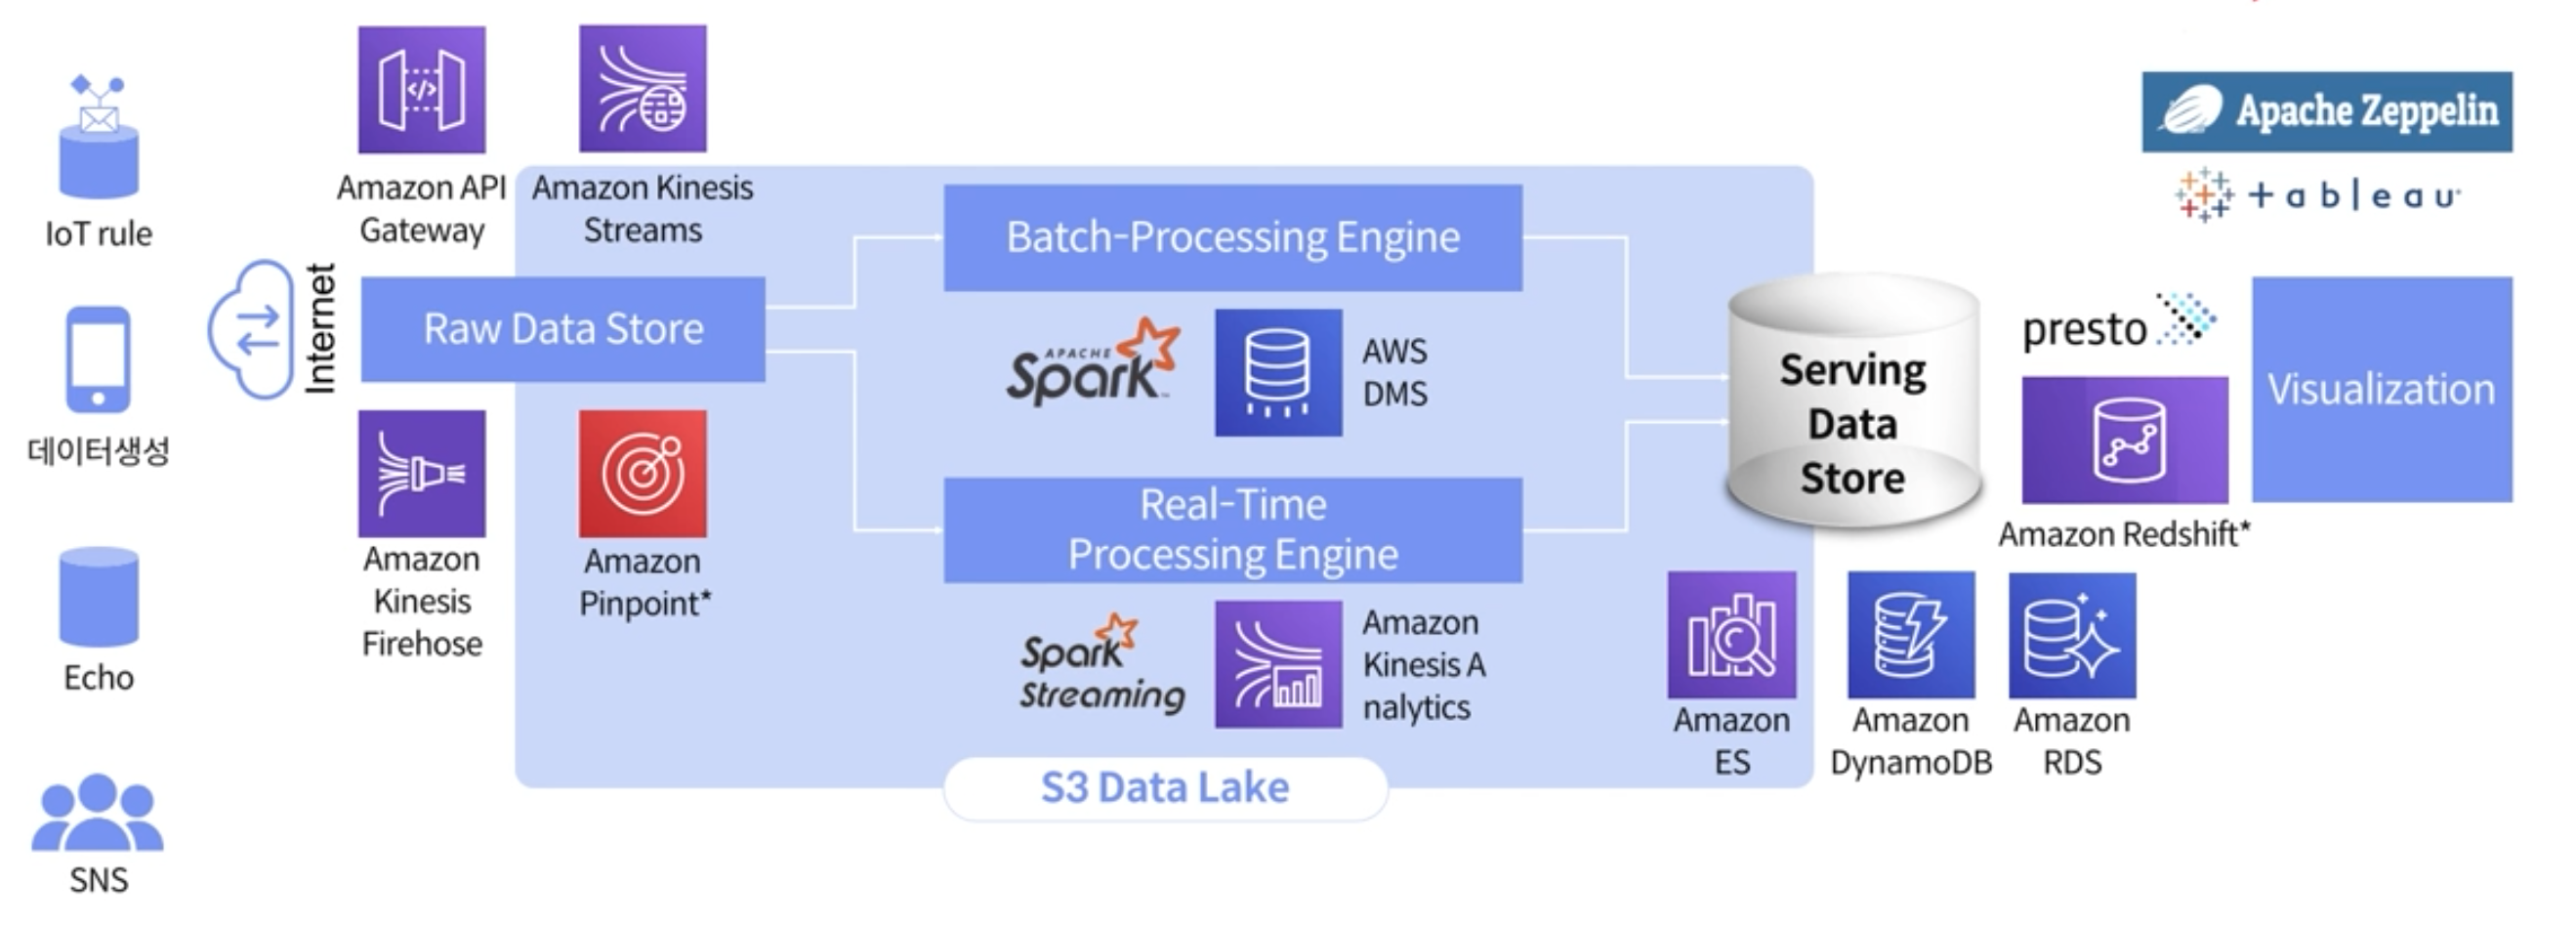 Batch Processing Engine & Real-Time Processing Engine